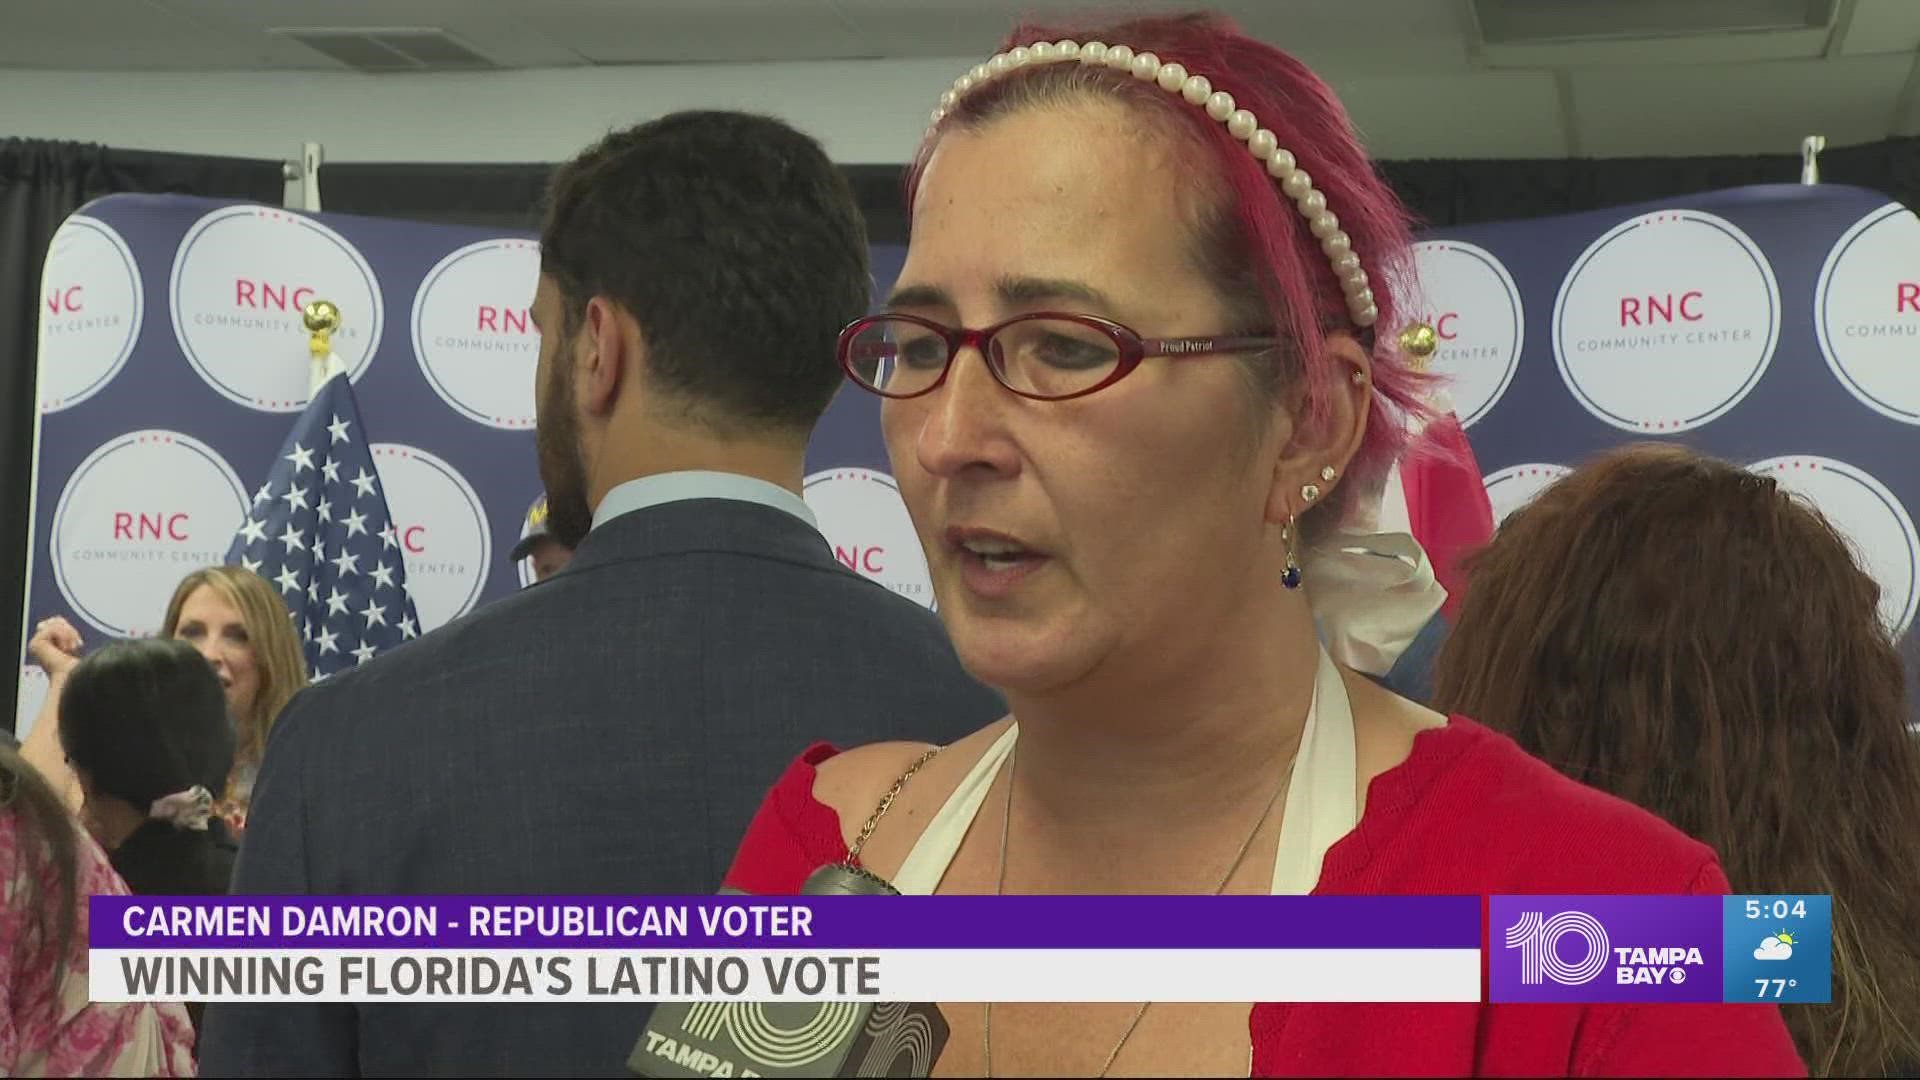 The Latino population makes up 21% of eligible voters in Florida.